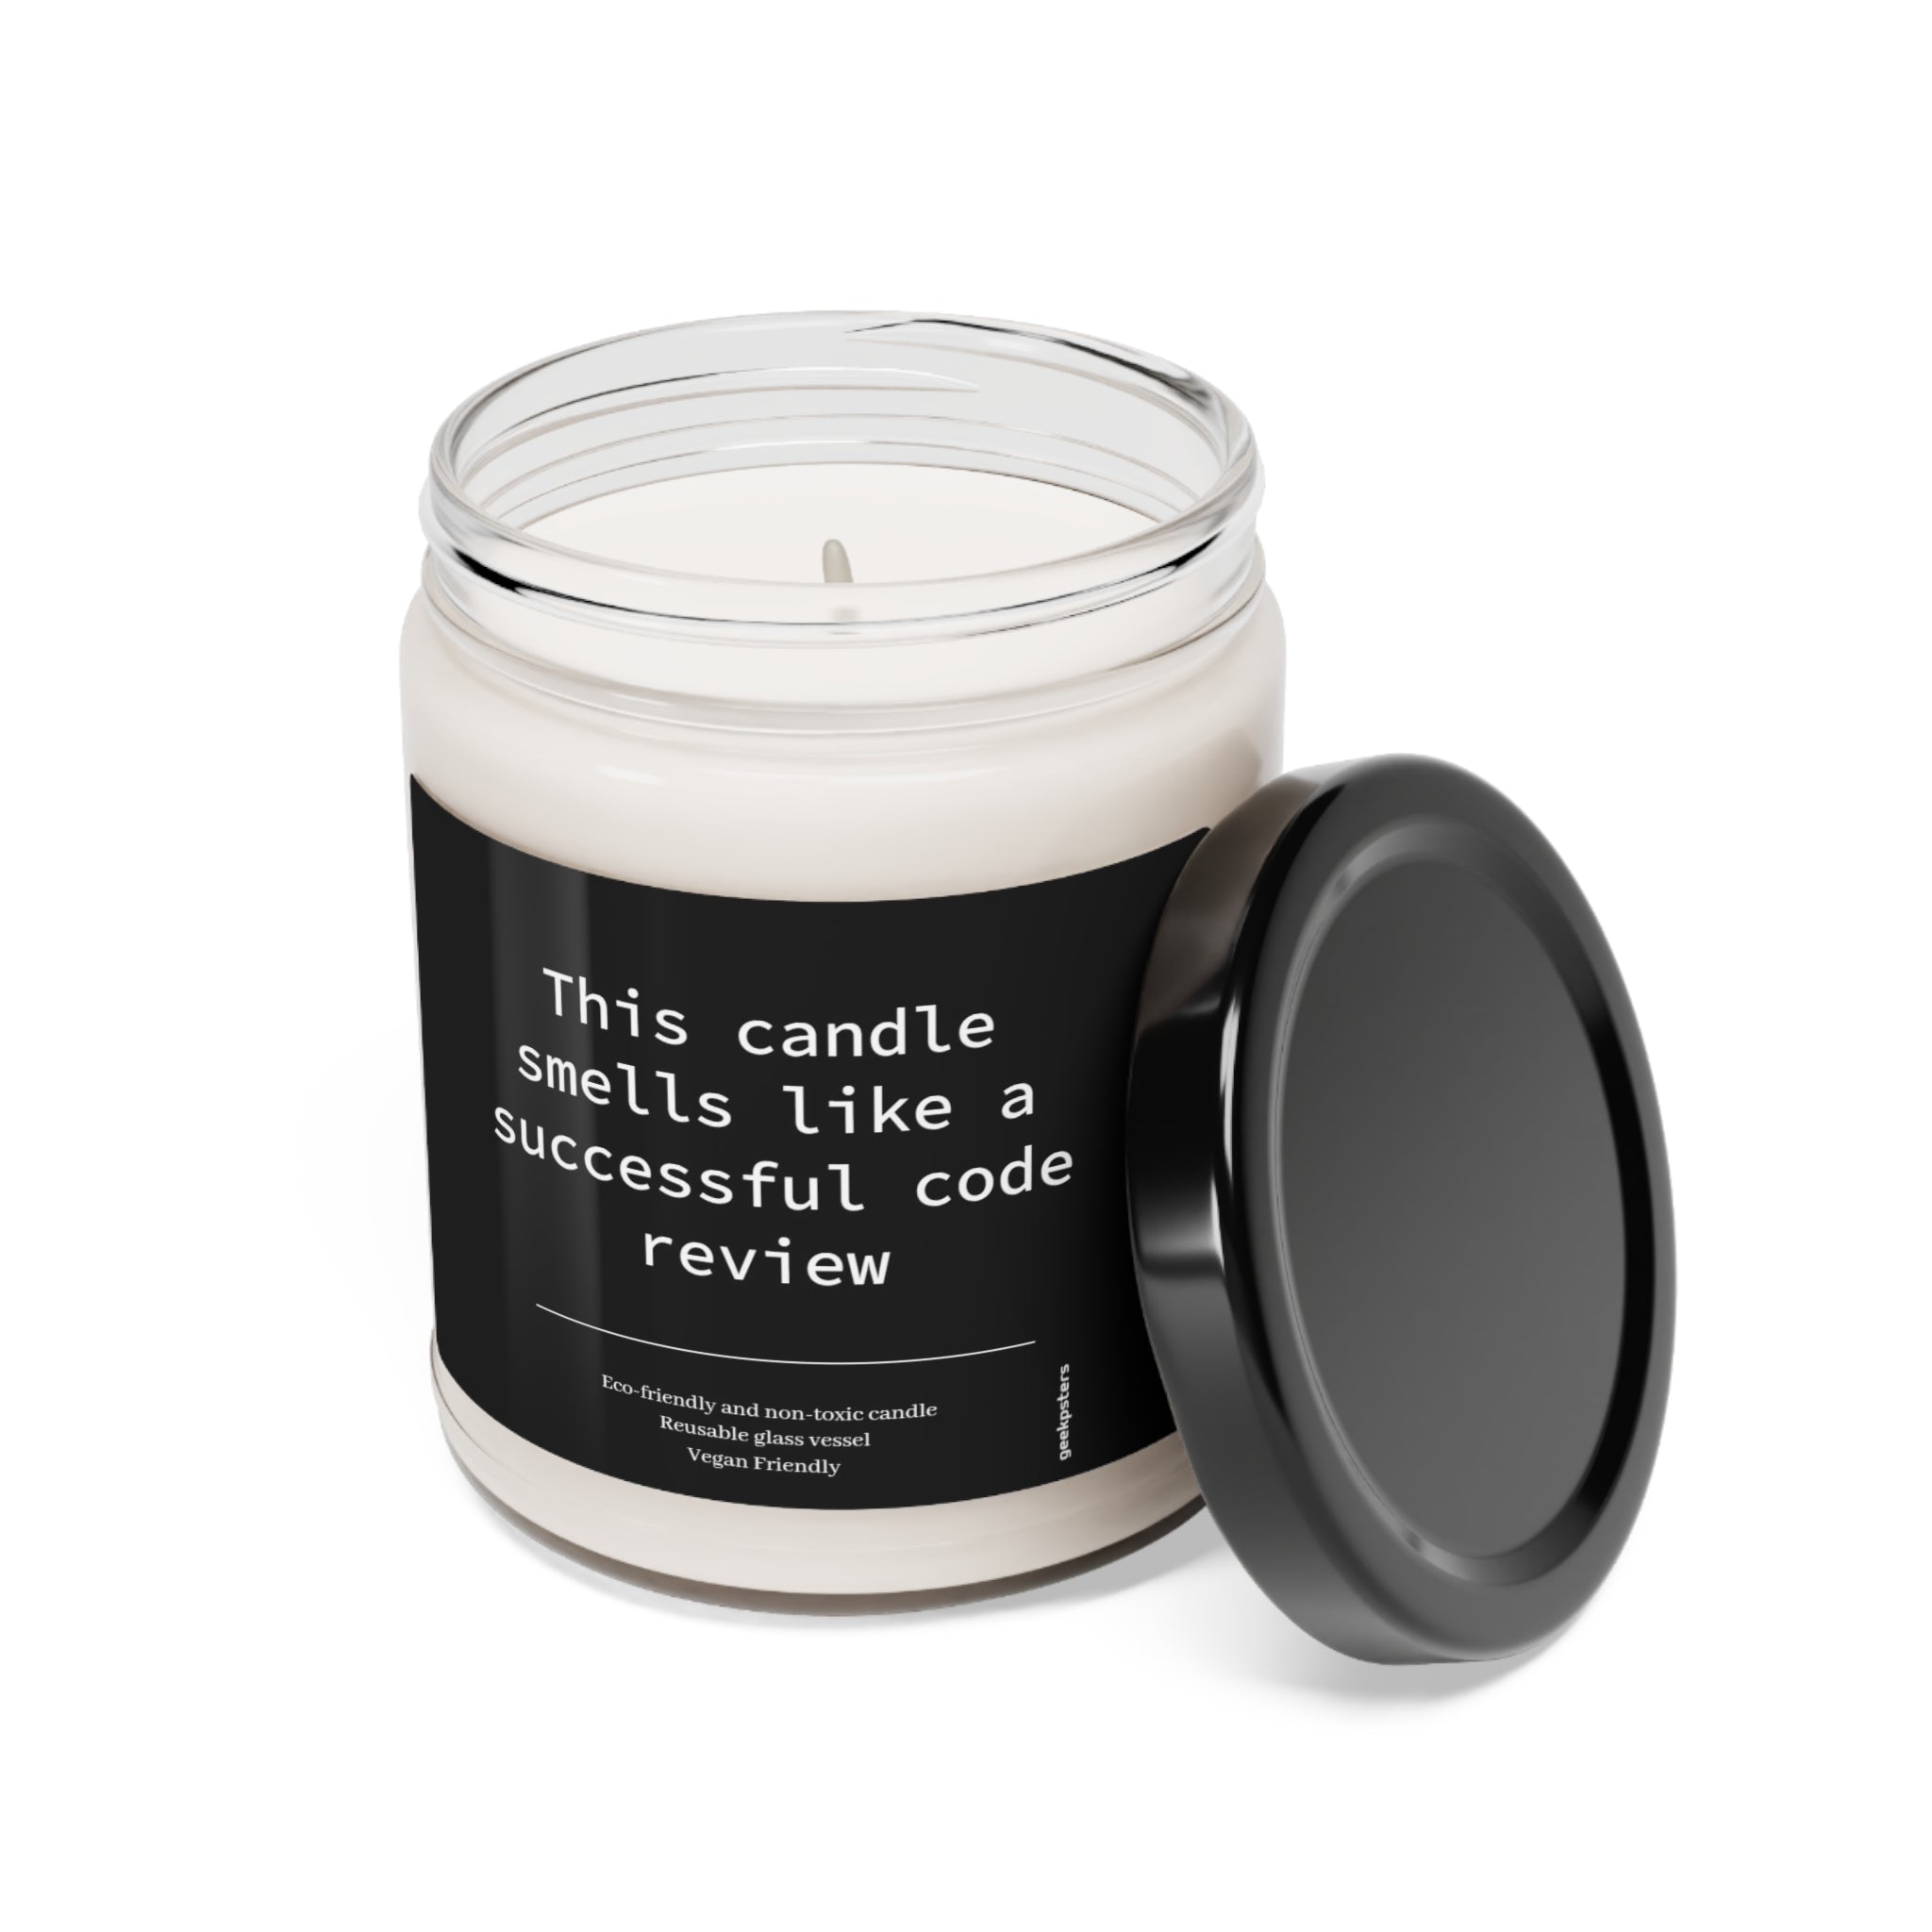 A This Candle Smells like a Successful Code Review soy candle in a glass jar with a black lid, labeled "this candle smells like a successful code review," on a white background.